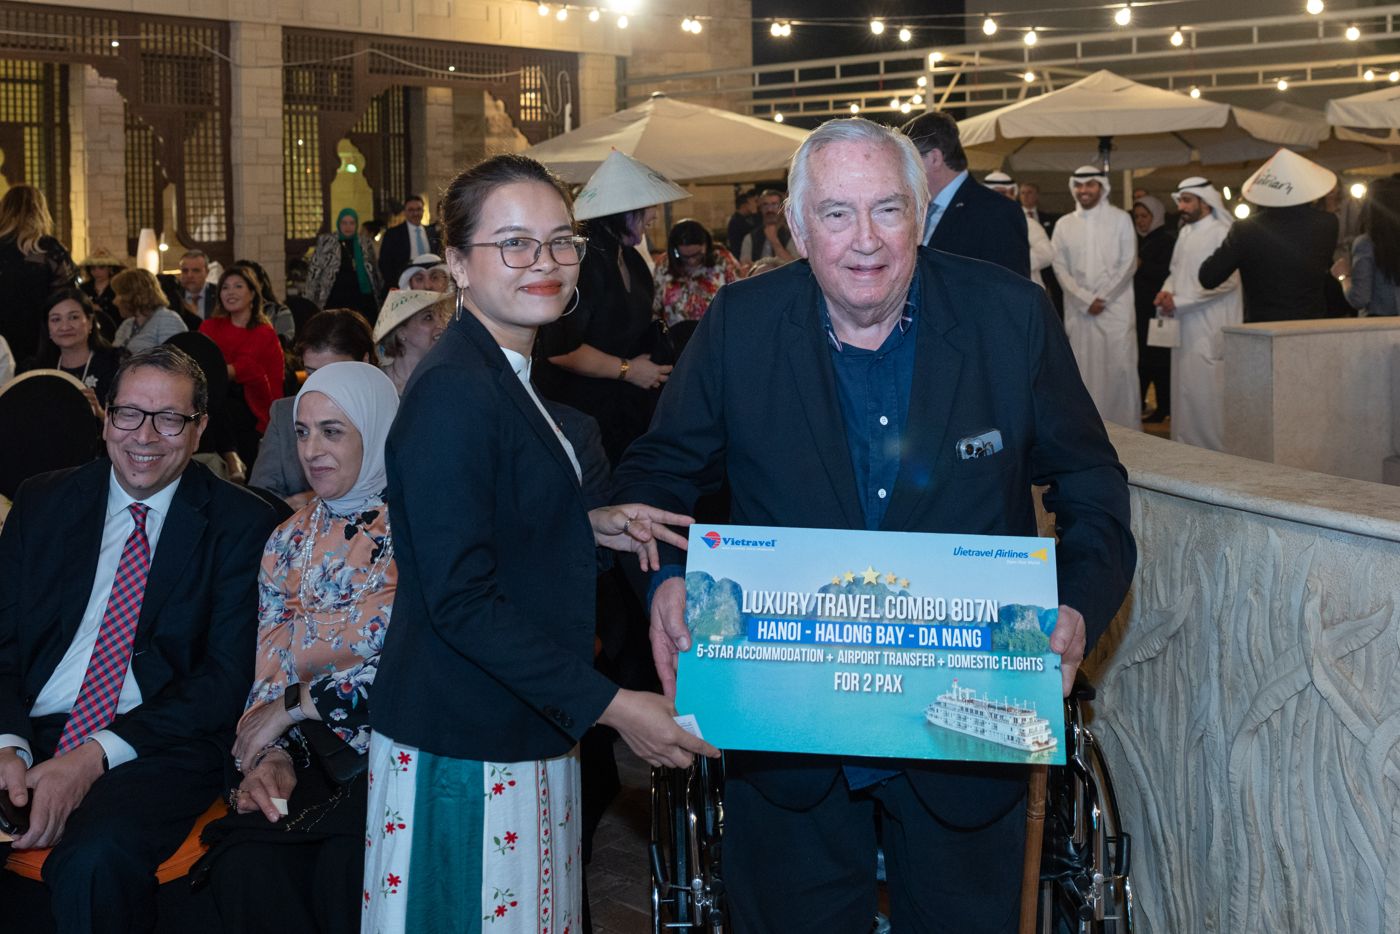 Vietravel awarded Mr. Mohamed M. Rasheed who won the lucky draw grand prize